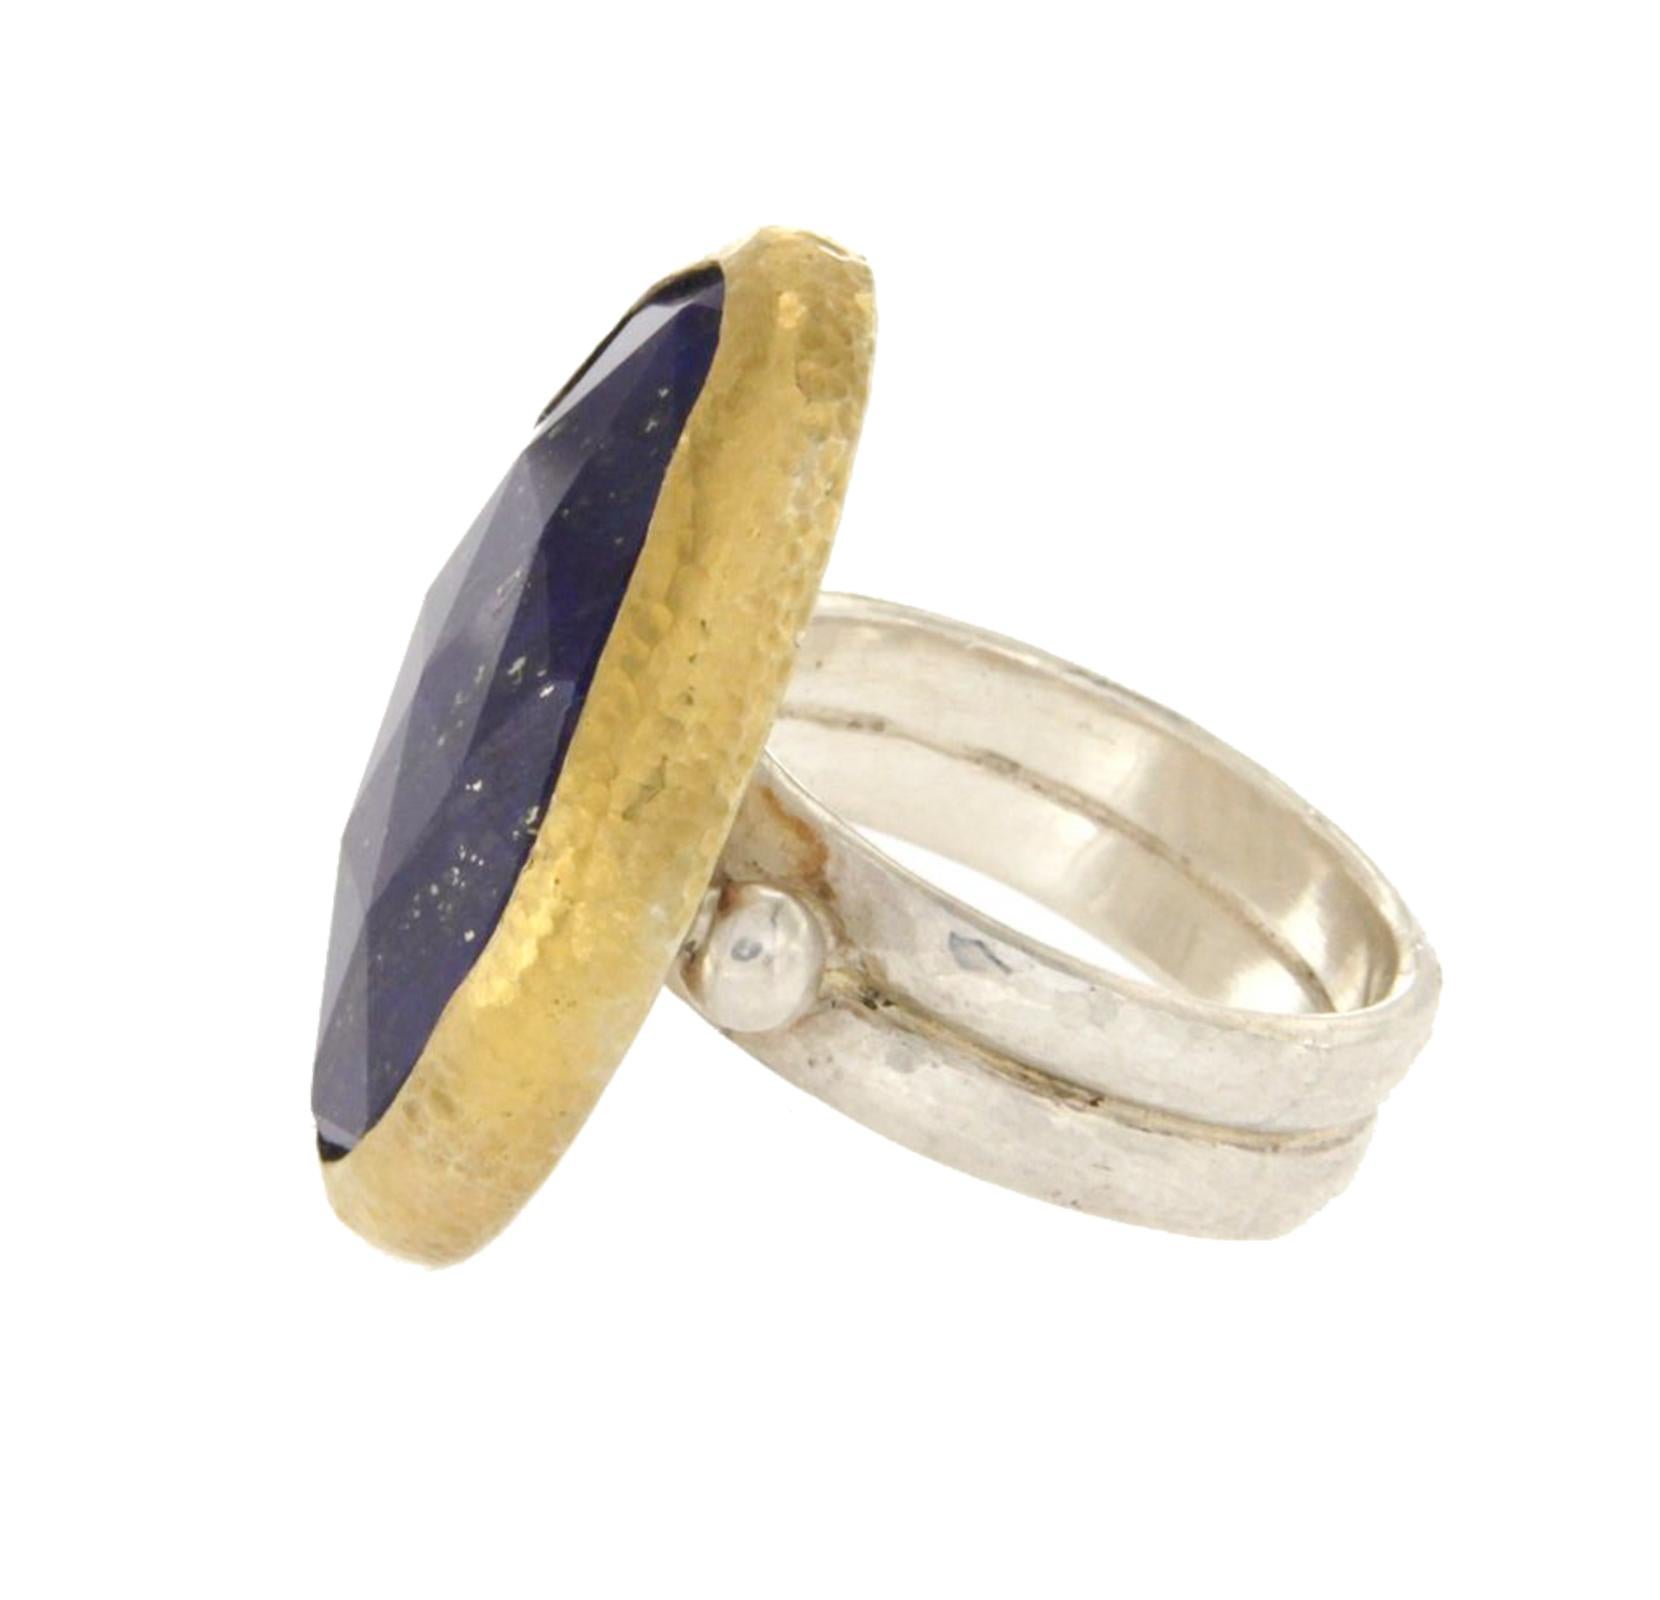 Top: 26.5 mm
Band Width: 6 mm
Metal: Yellow Gold & 925 Sterling Silver
Size: 6.5
Hallmarks: Gurhan 925
Total Weight: 11.2 Grams
Stone Type: Lapis
Condition: Pre Owned
Estimated Retail Price: $1400
Stock Number: U416